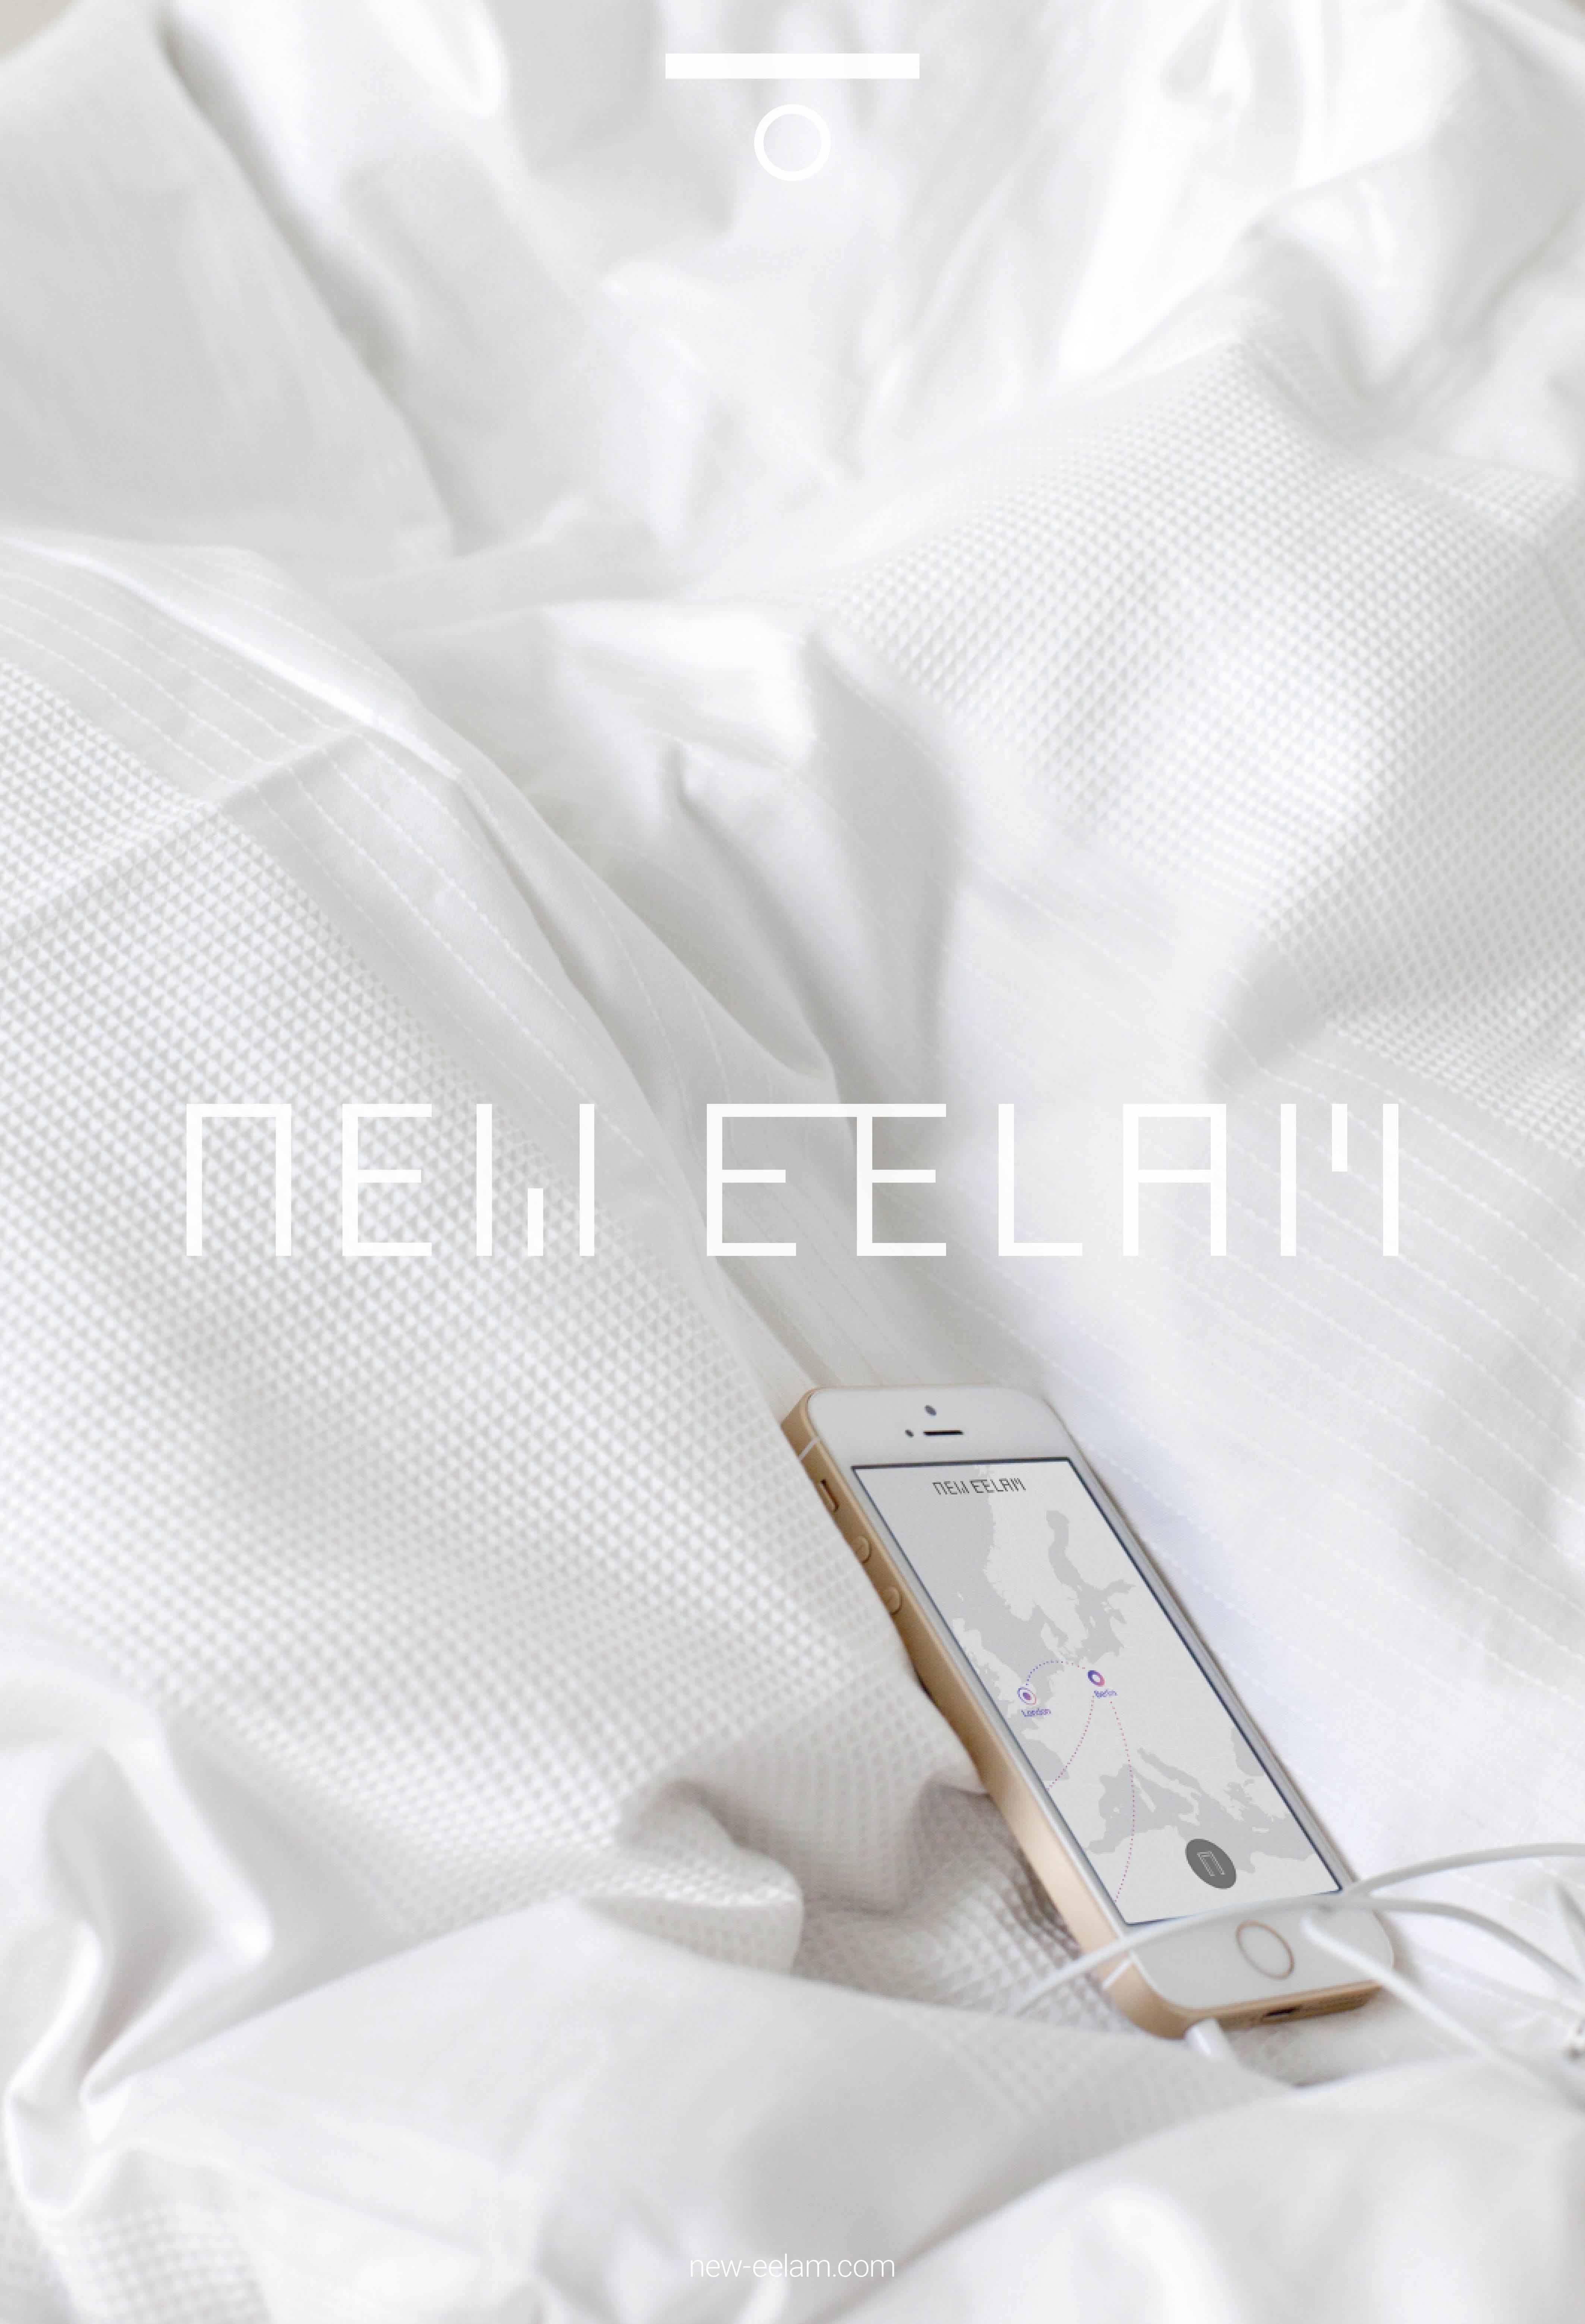 An iPhone displaying an unmarked map of Europe rests on crisp white bedding. Futuristic white text reading "NEW EELAM" appears over the middle of the image.